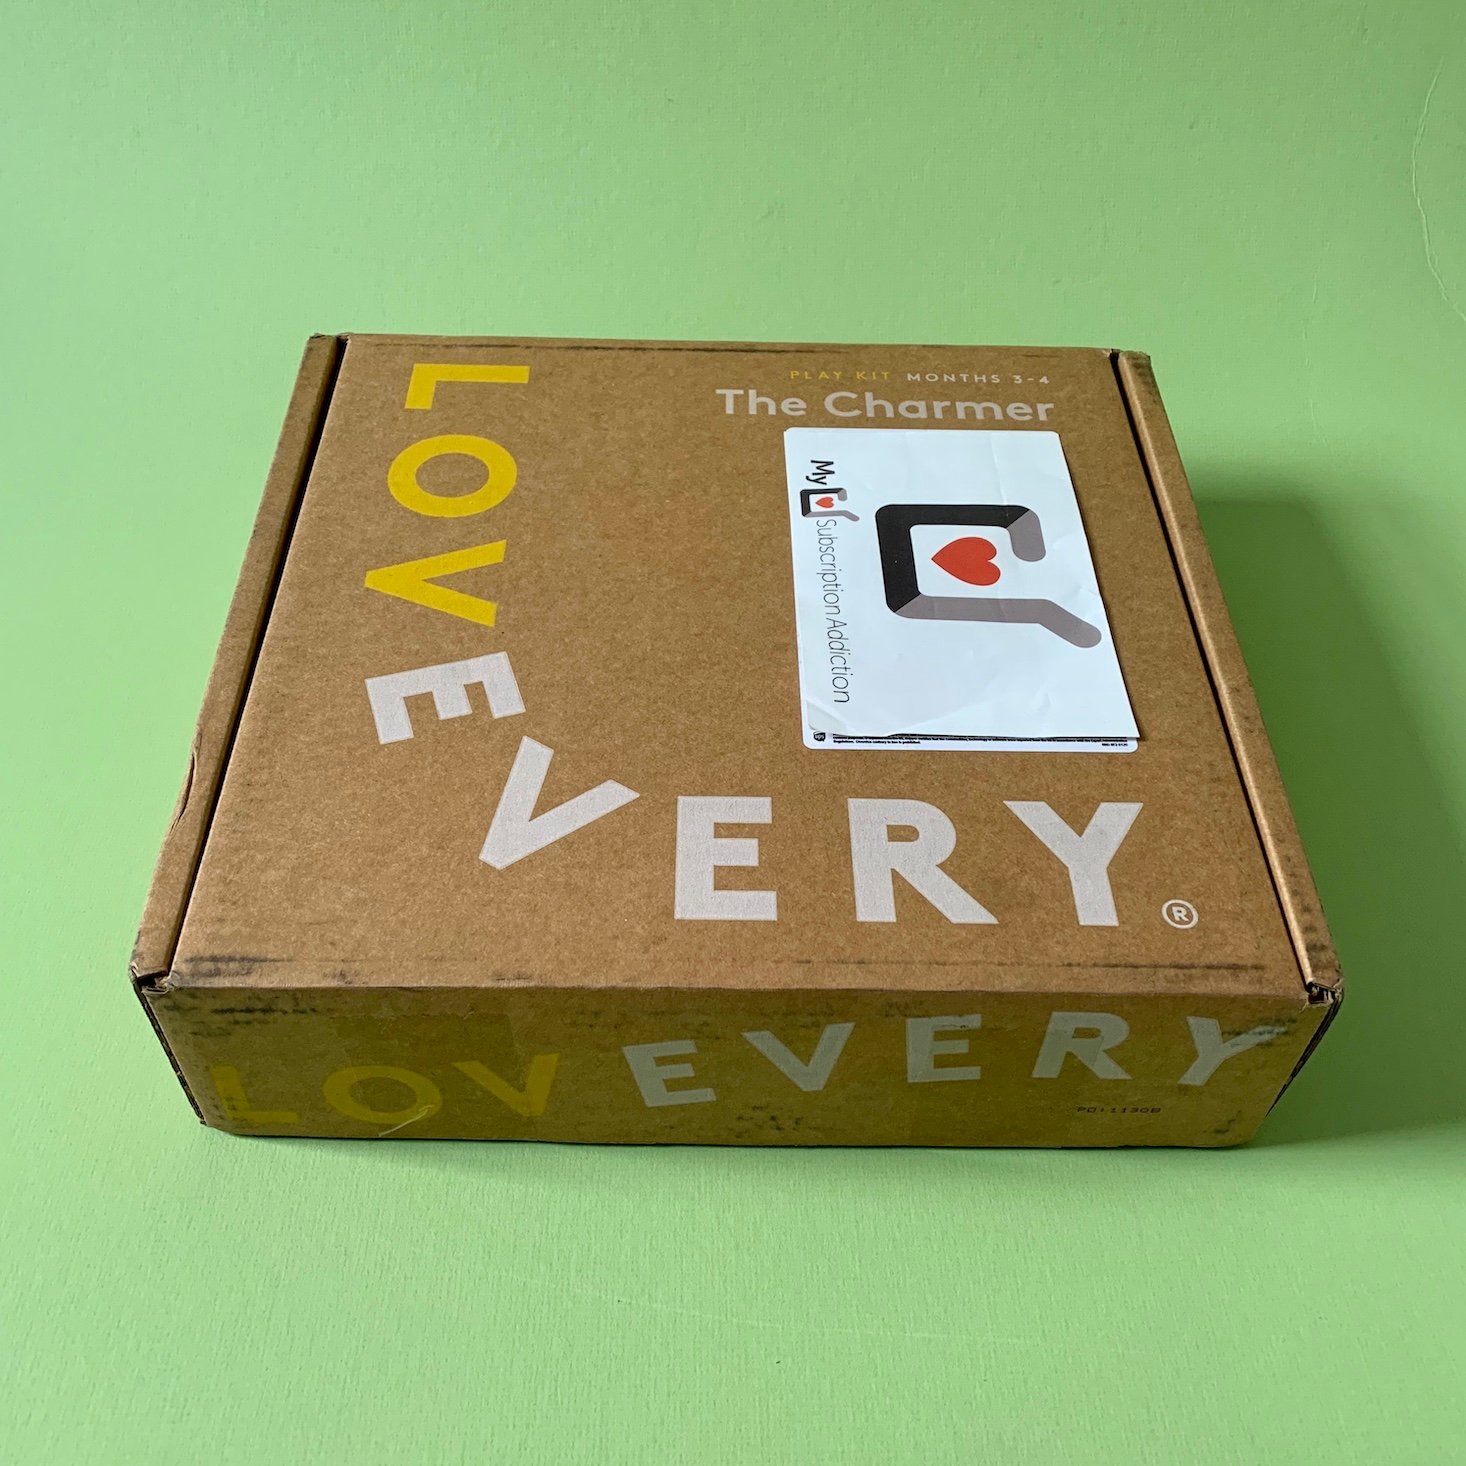 Lovevery “The Charmer” Play Kit Review – February 2020